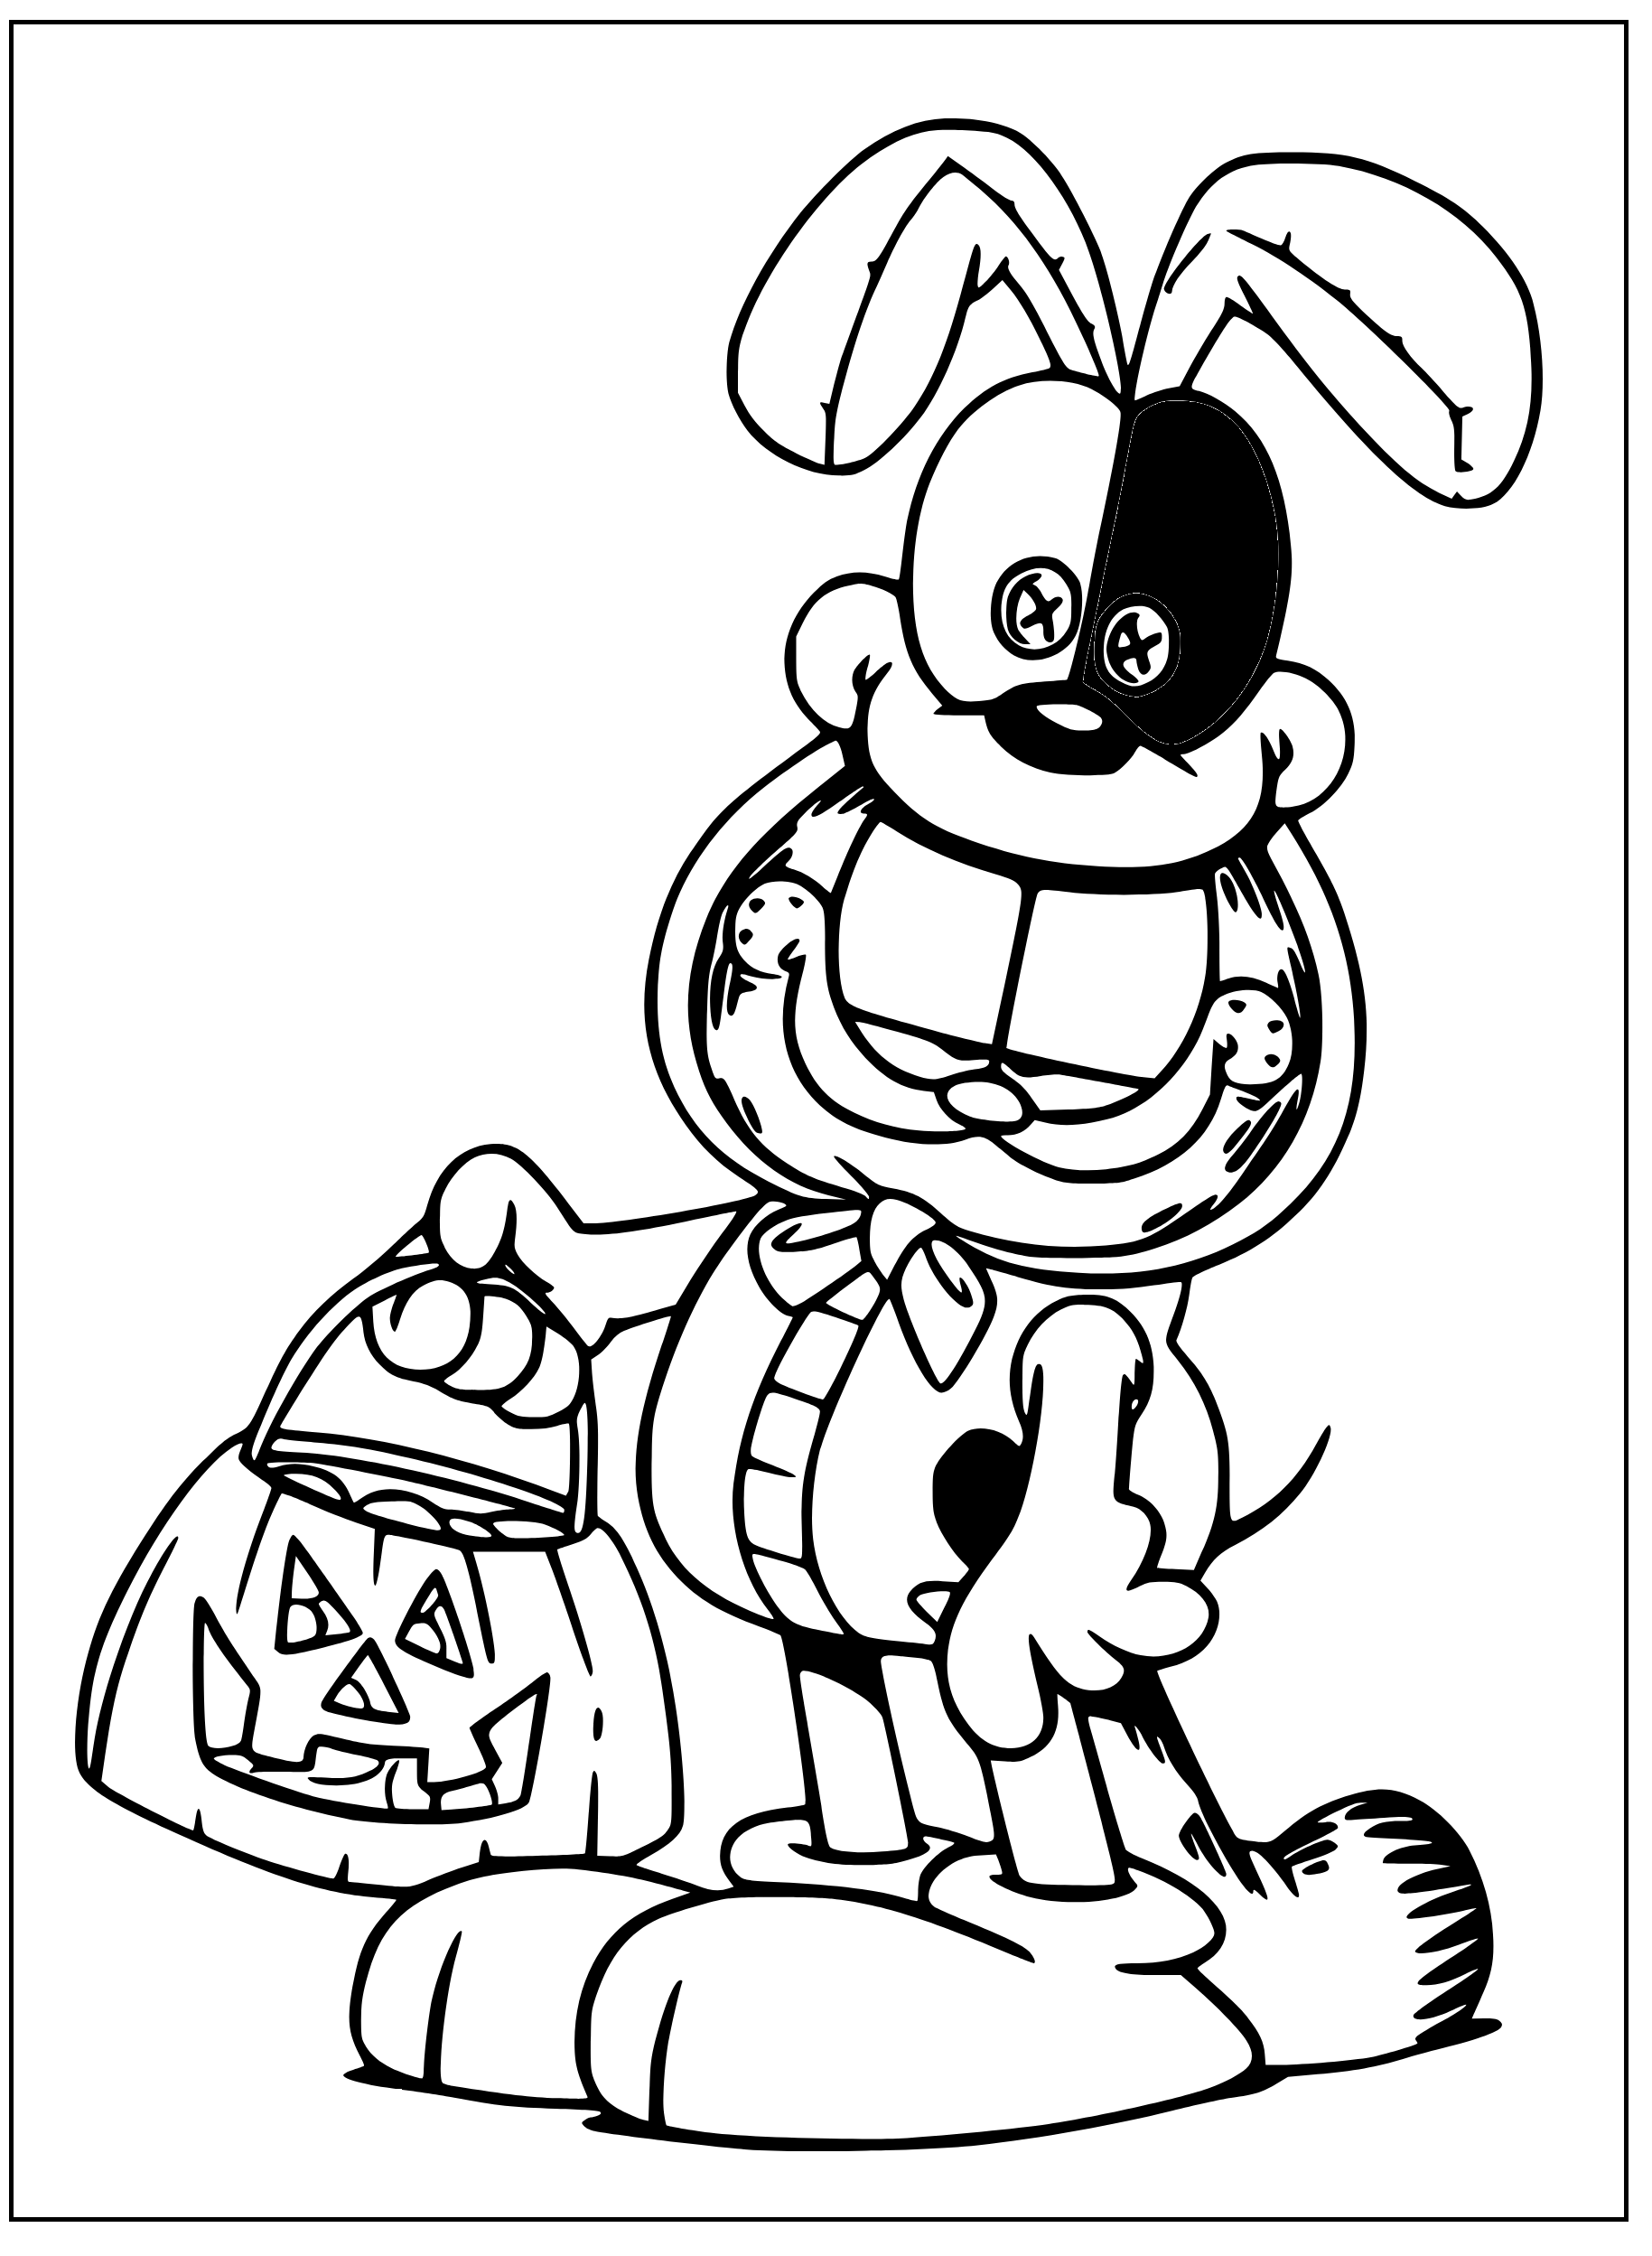 Printable Garfield wearing Odie outfit Coloring Page for kids.